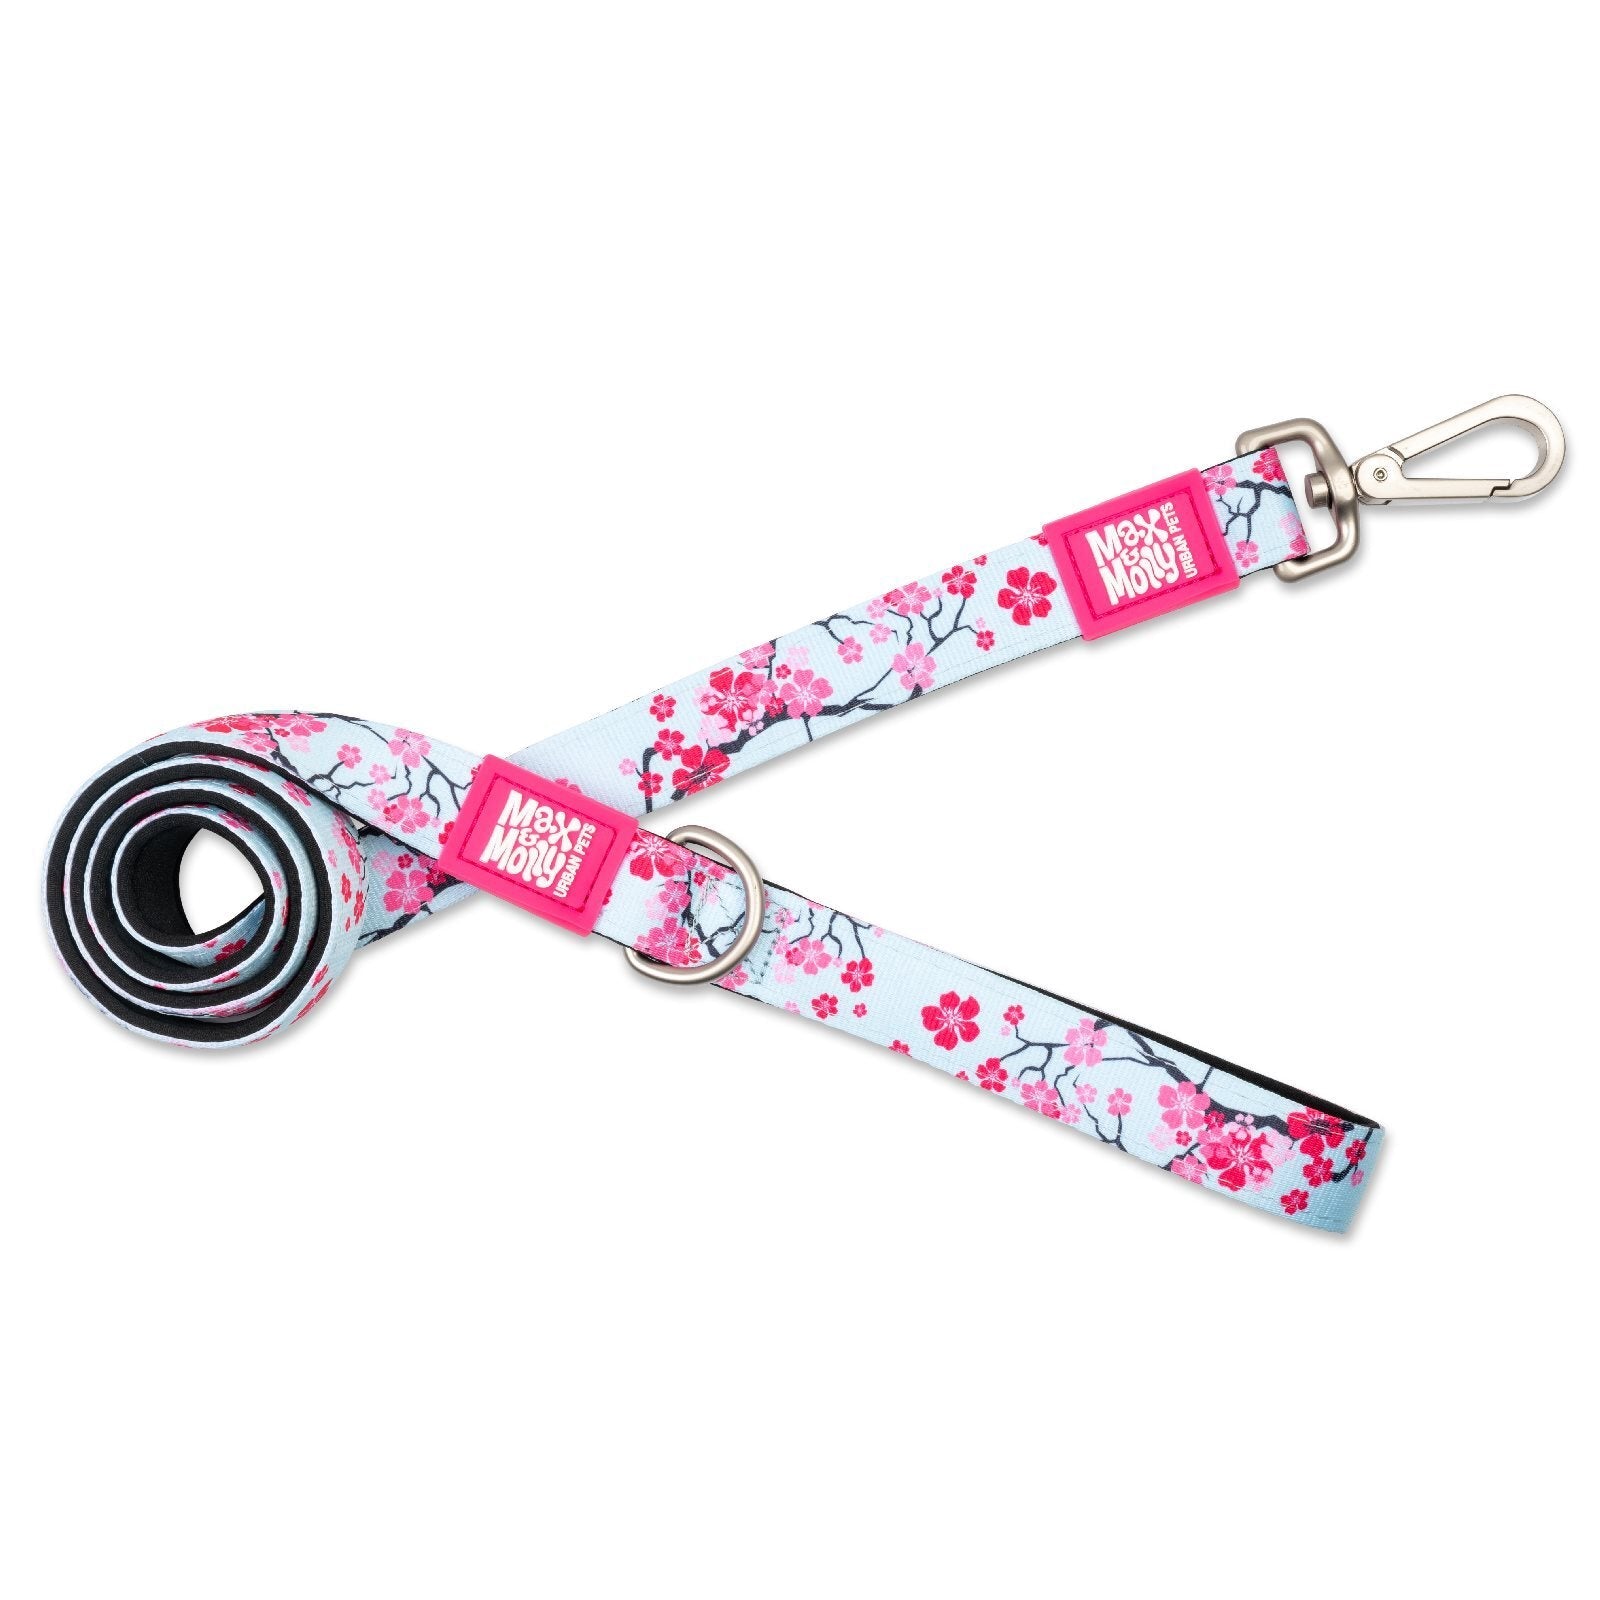 Max & Molly Dog Leash - Cherry Bloom - Pets and More